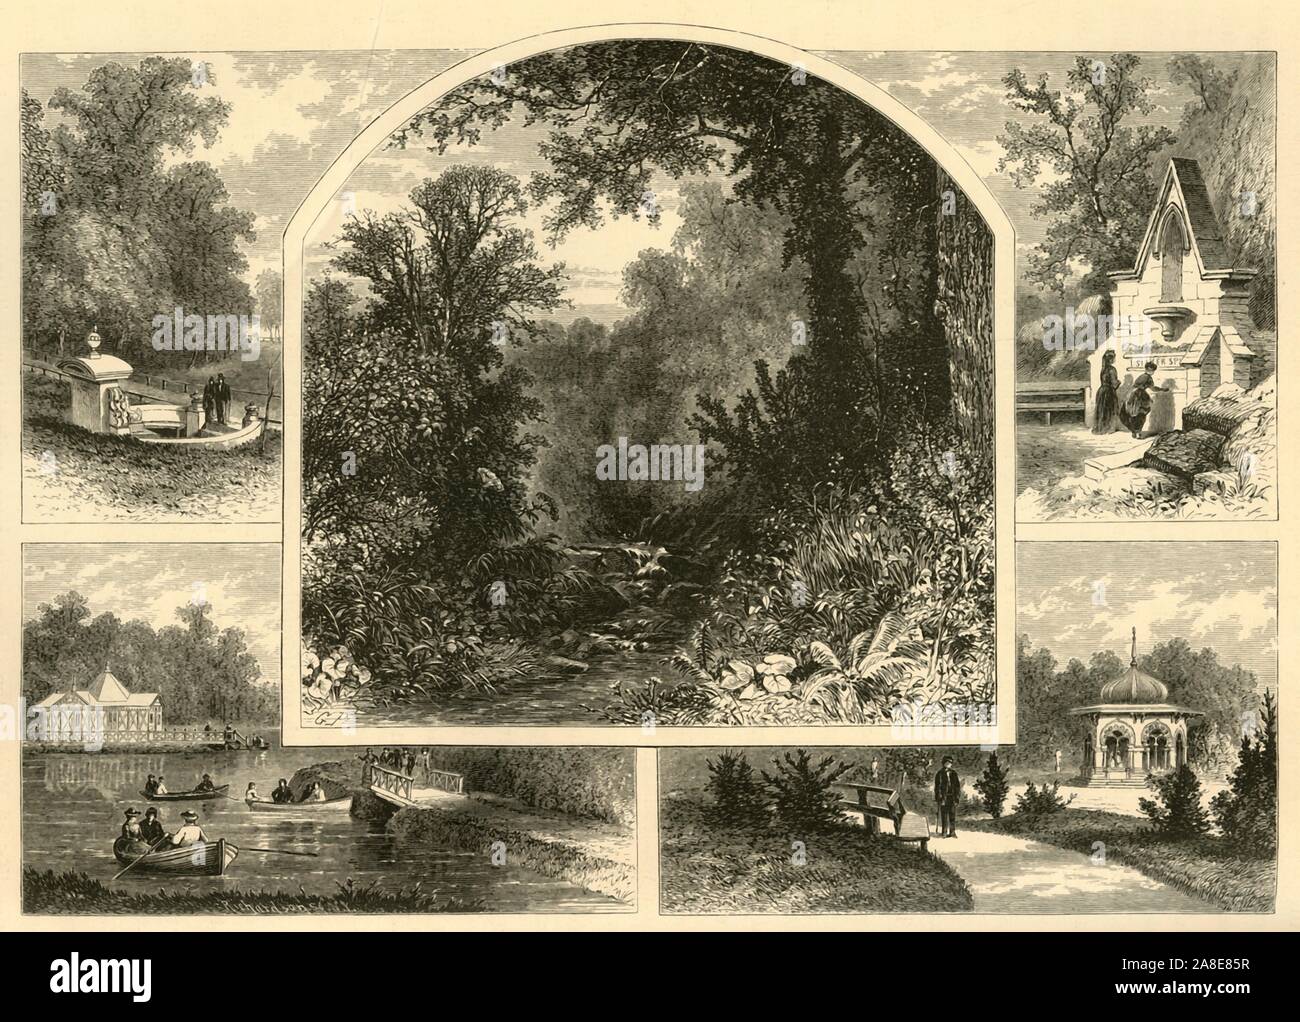 'Scenes in Druid Hill Park', 1874. Waterfall, drinking fountain, boating lake and bandstand in Baltimore, Maryland, USA. 'Druid-Hill Park lies immediately on the northern suburbs of the city, and embraces nearly seven hundred acres of well-diversified surface...Quiet, sequestered dells, and cool, shaded valleys, watered by streams and rejoicing in springs of the purest water; drives that wind through meadows and woods; bridle-paths and foot-ways that seldom leave the welcome shadow of the trees, render the park one of great rural beauty and sylvan seclusion. It is indeed not a made show-ground Stock Photo